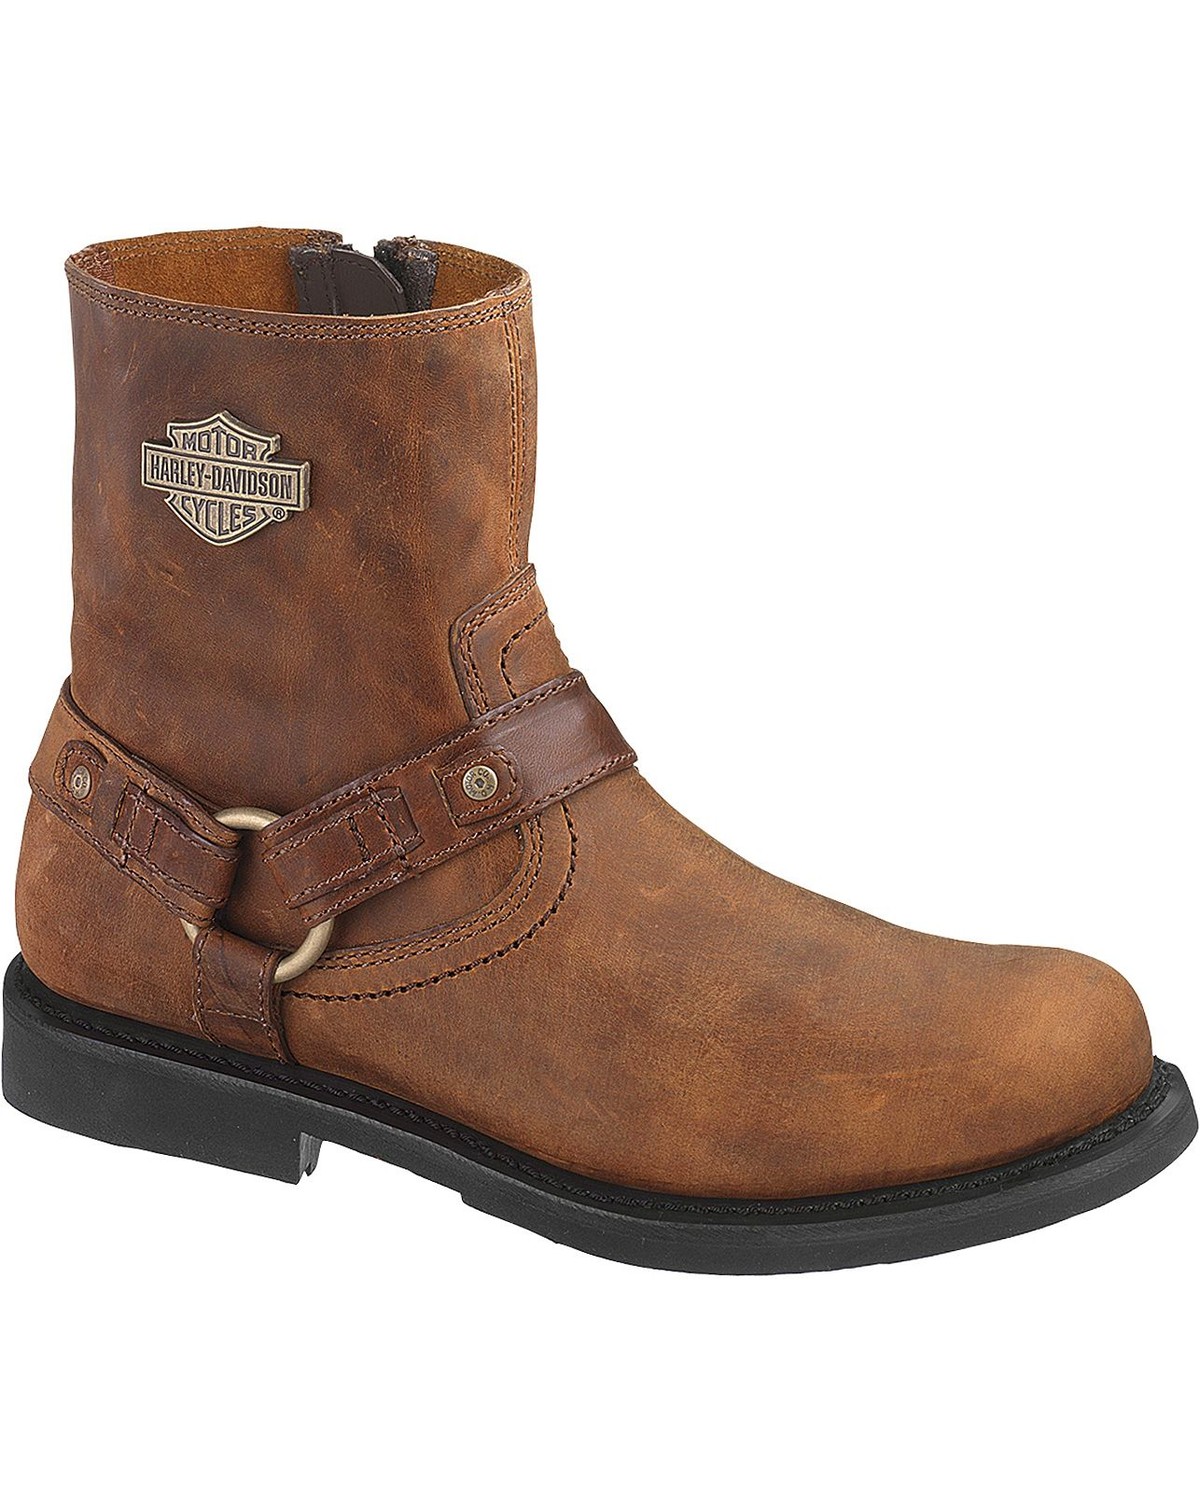 Harley Davidson Scout Men's Boots - Round Toe